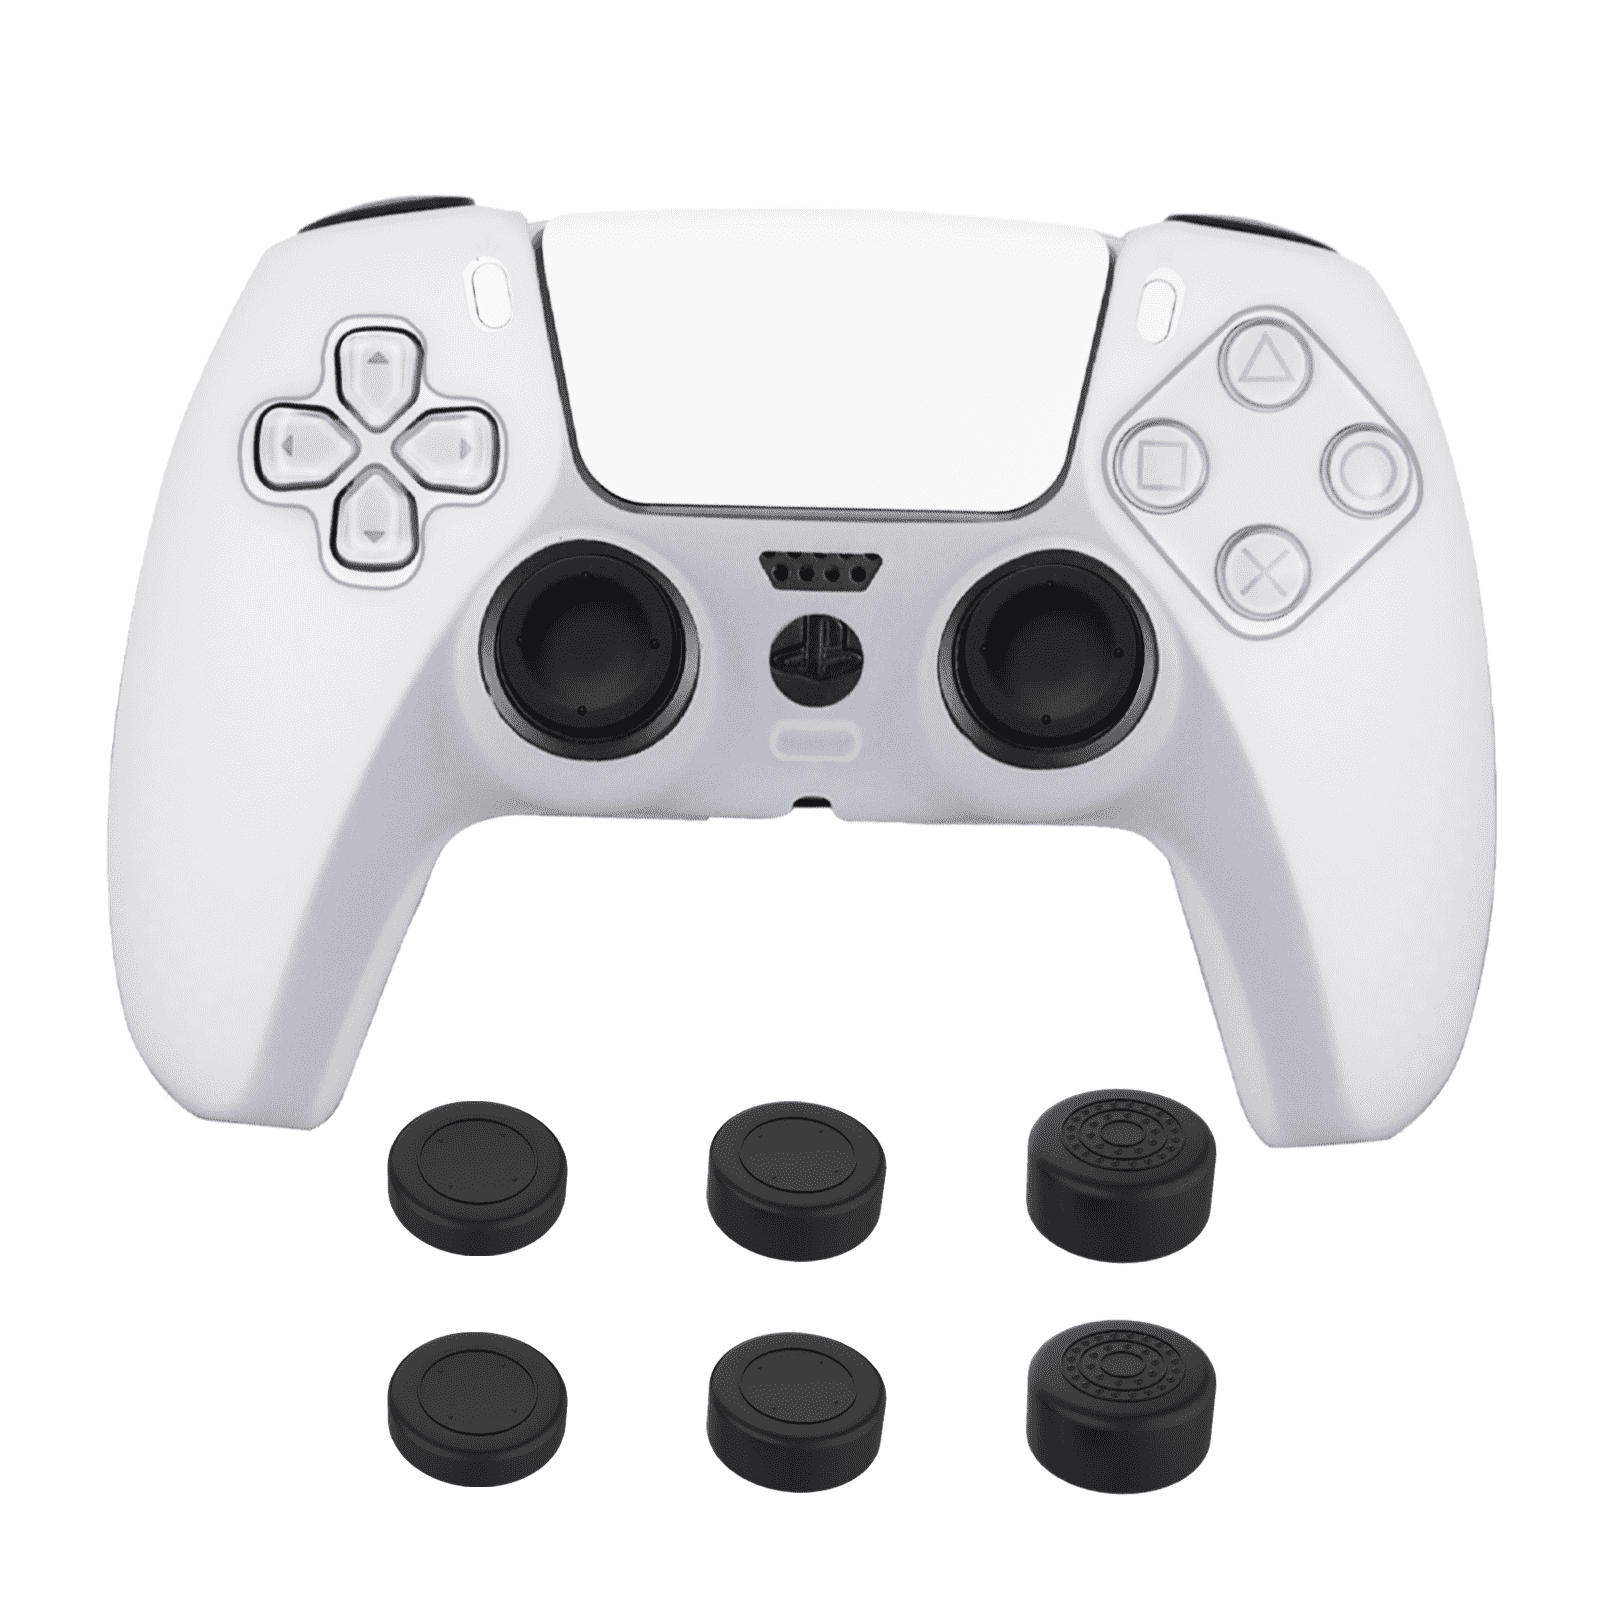 White controller protector case cover with 6 analog thumb grips cover